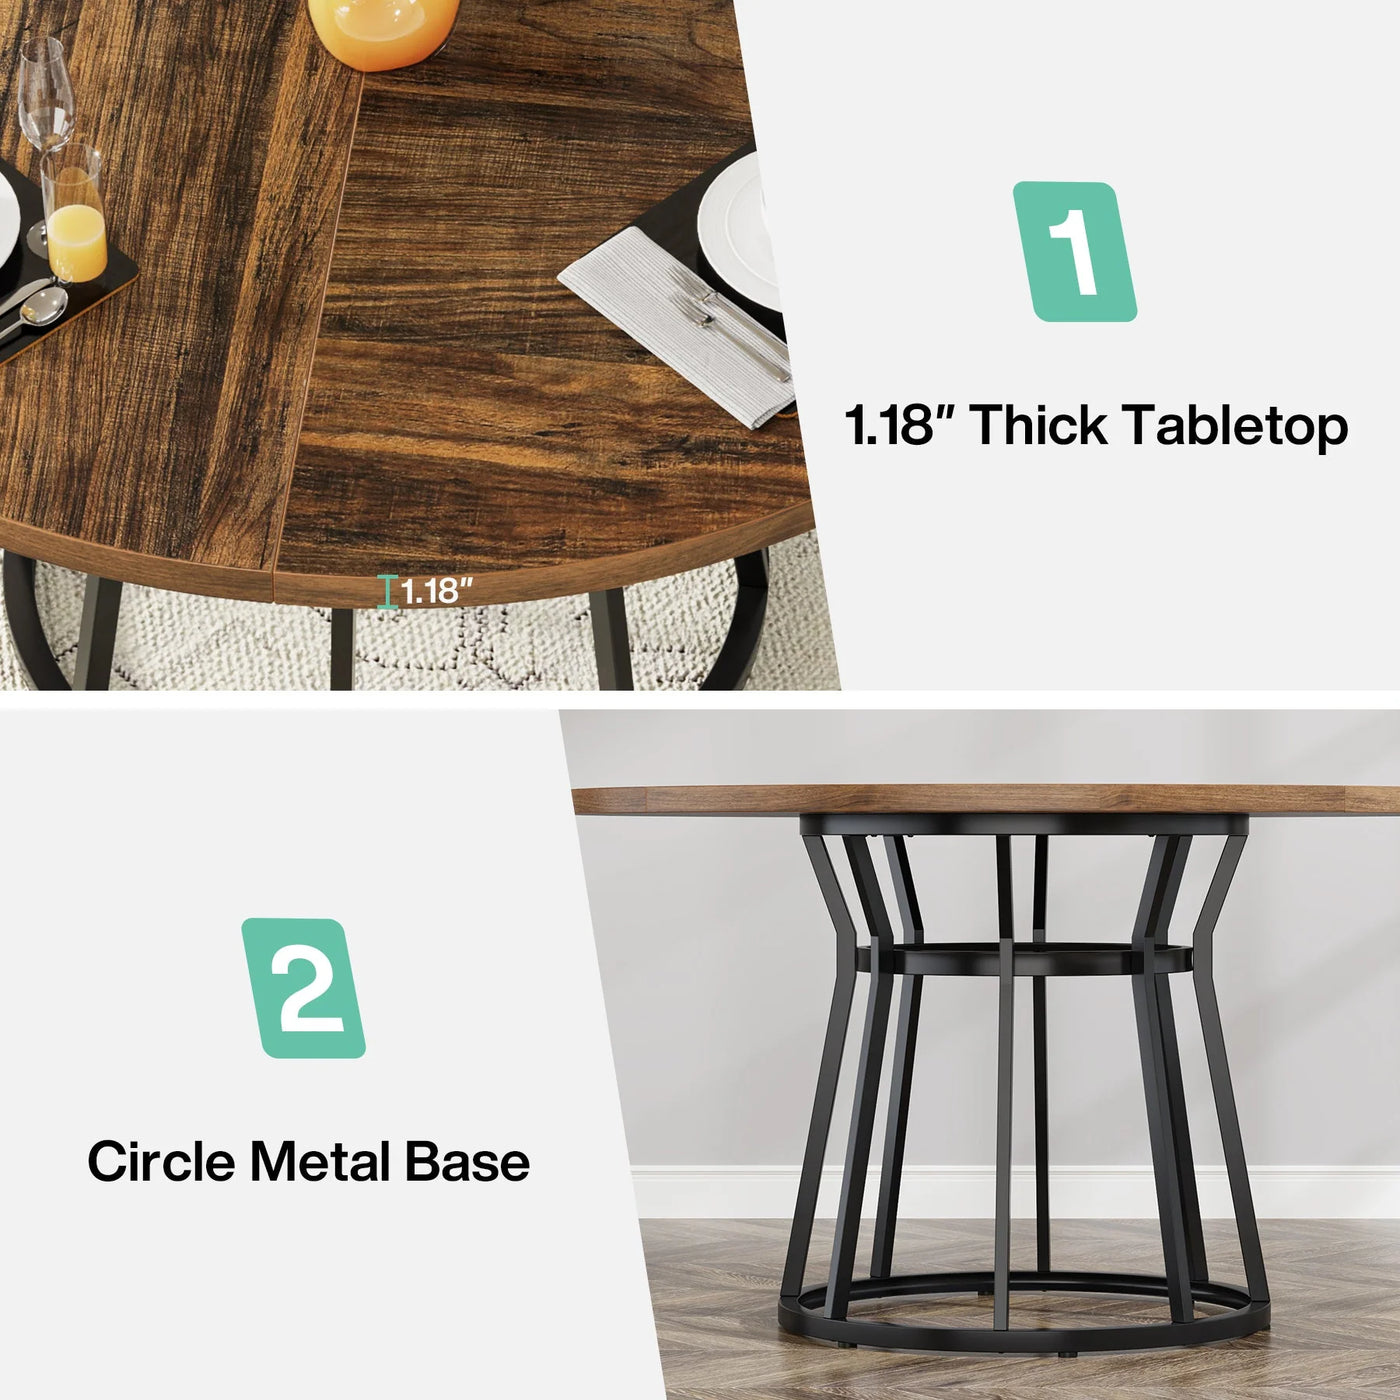 Louvre Round Dining Table for 4 People | 47.2" Kitchen Dinner Table with Metal Base